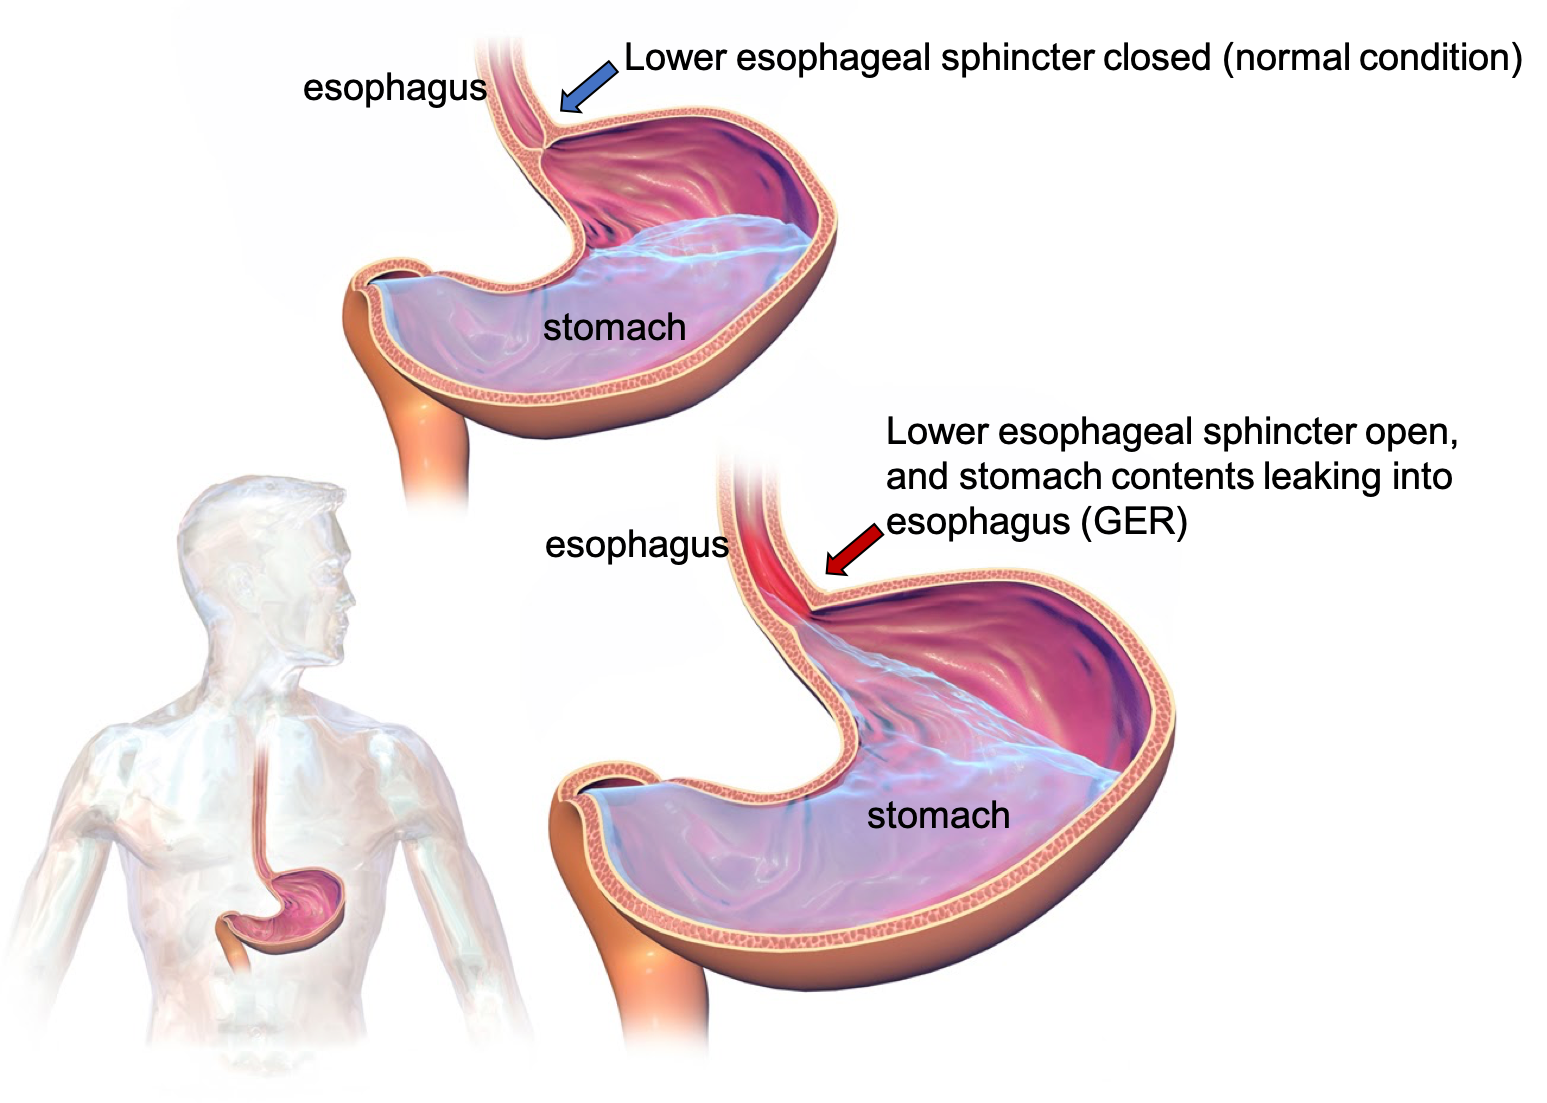 The illustration shows a silhouette of a person, with the esophagus and stomach highlighted, at bottom left. At top, a normal stomach is shown, with the lower esophageal sphincter closed and the stomach contents fully contained in the stomach. At lower right, a stomach is shown with GER; the lower esophageal sphincter is open and the stomach context are leaking into the esophagus.